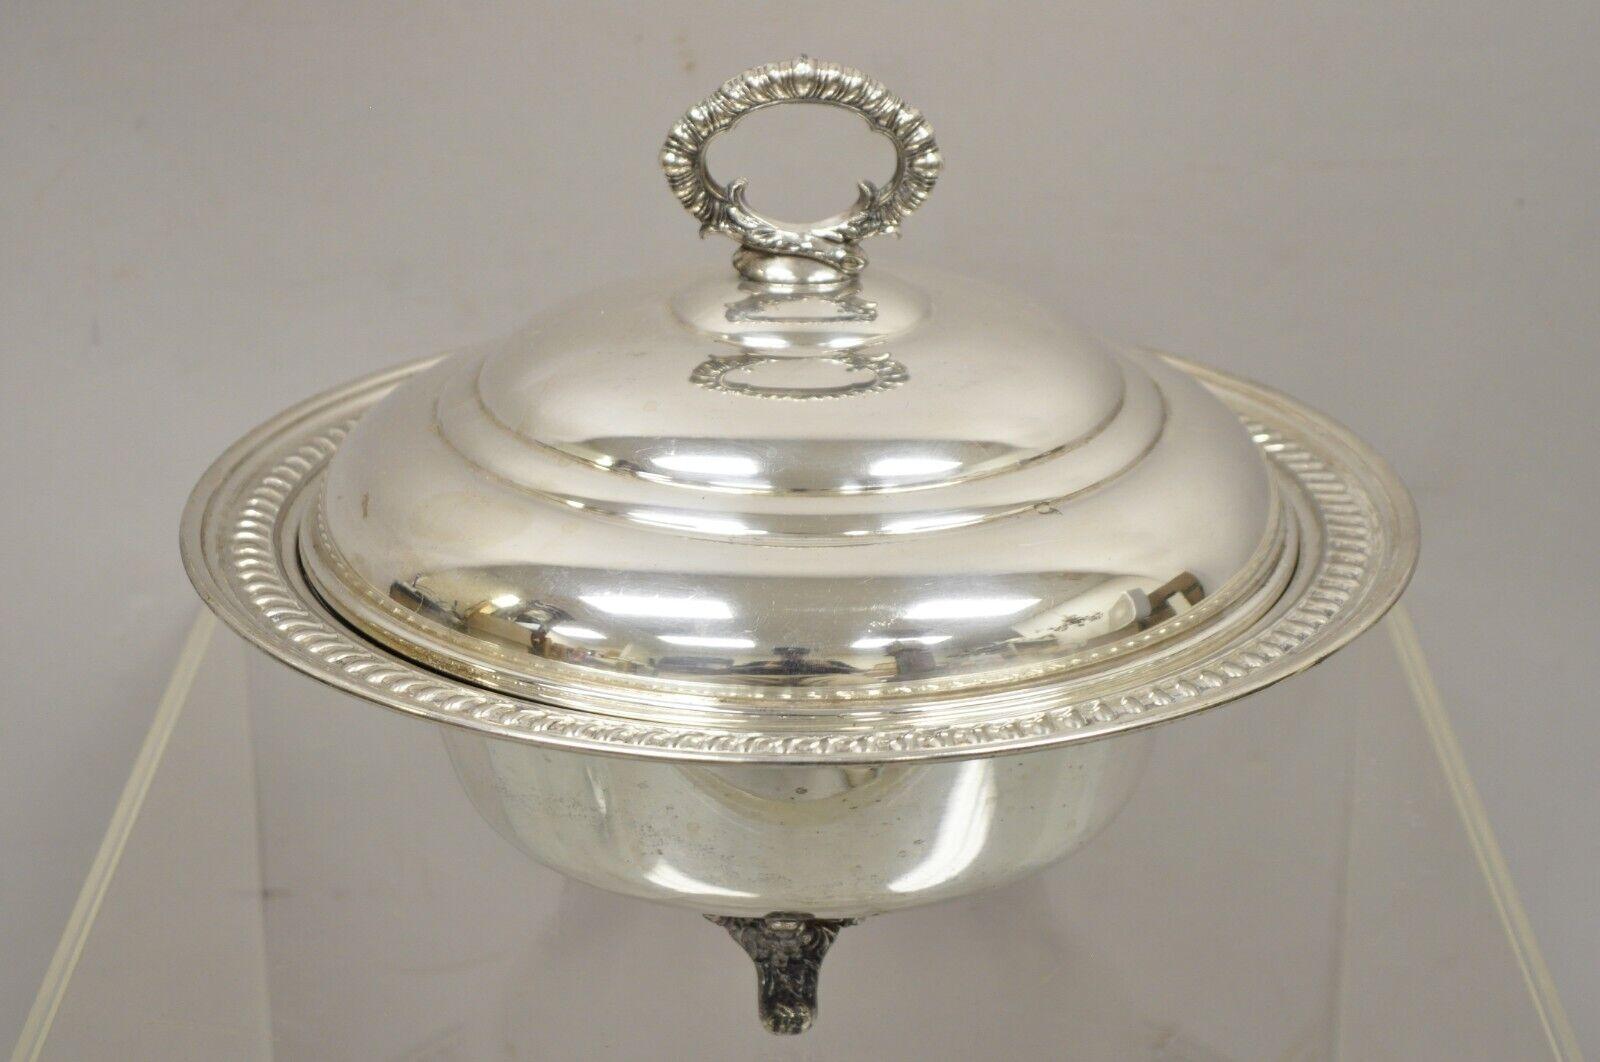 Vintage English Regency Victorian style silver plated lidded vegetable serving dish bowl. Item features Etch decorated interior, dome lid, triple raised feet. Circa early-mid-1900s. Measurements: 9